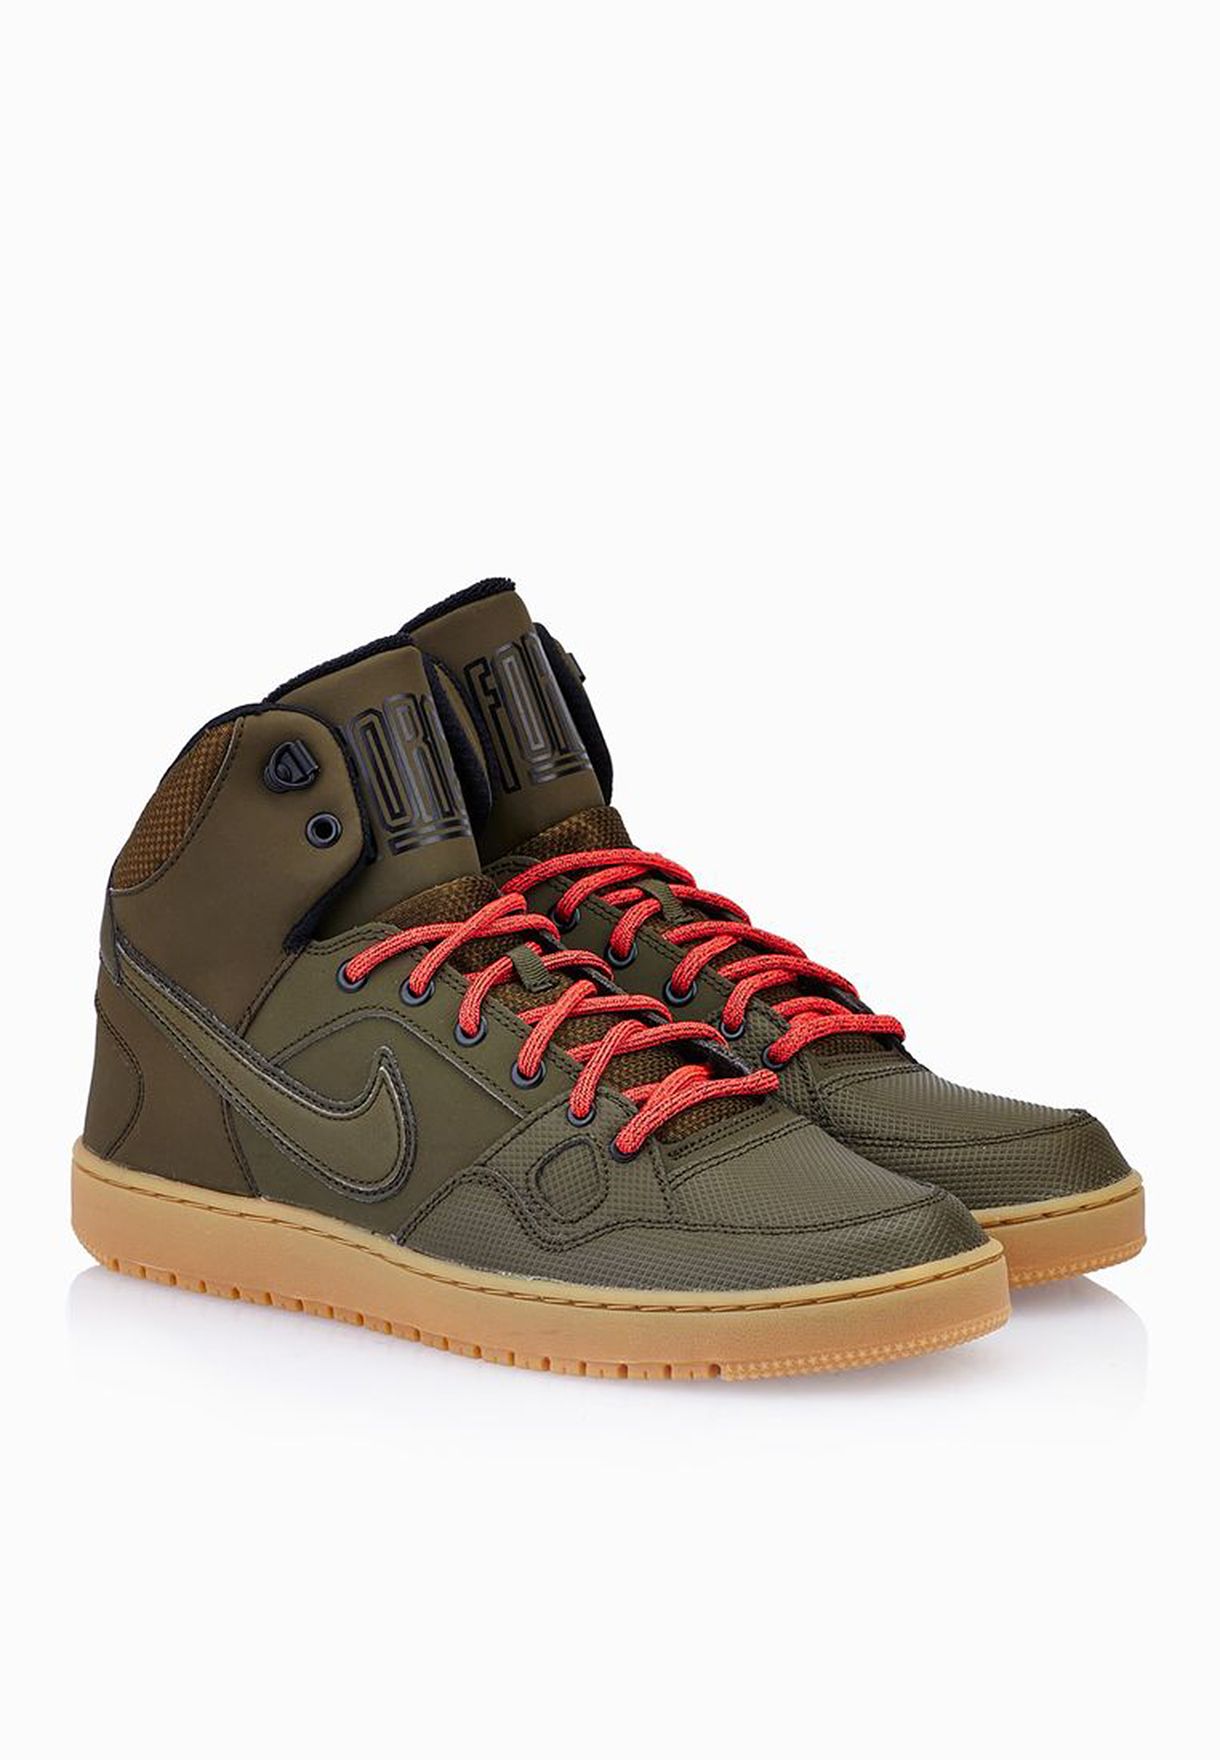 son of force nike mid winter